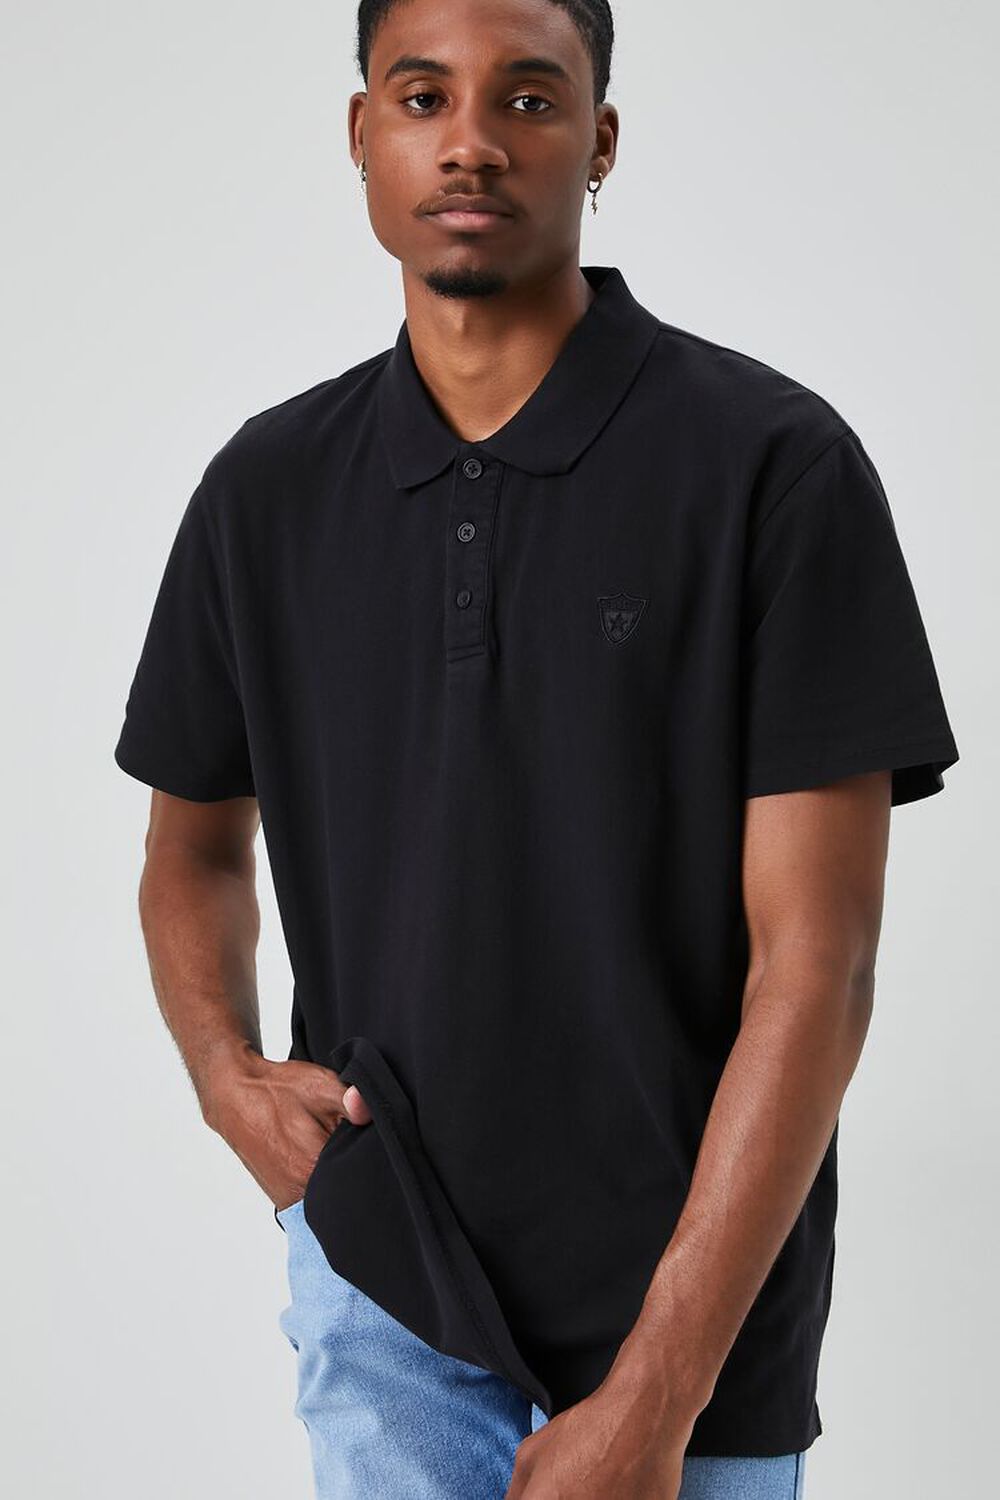 BLACK Embroidered Crest Polo Shirt, image 1